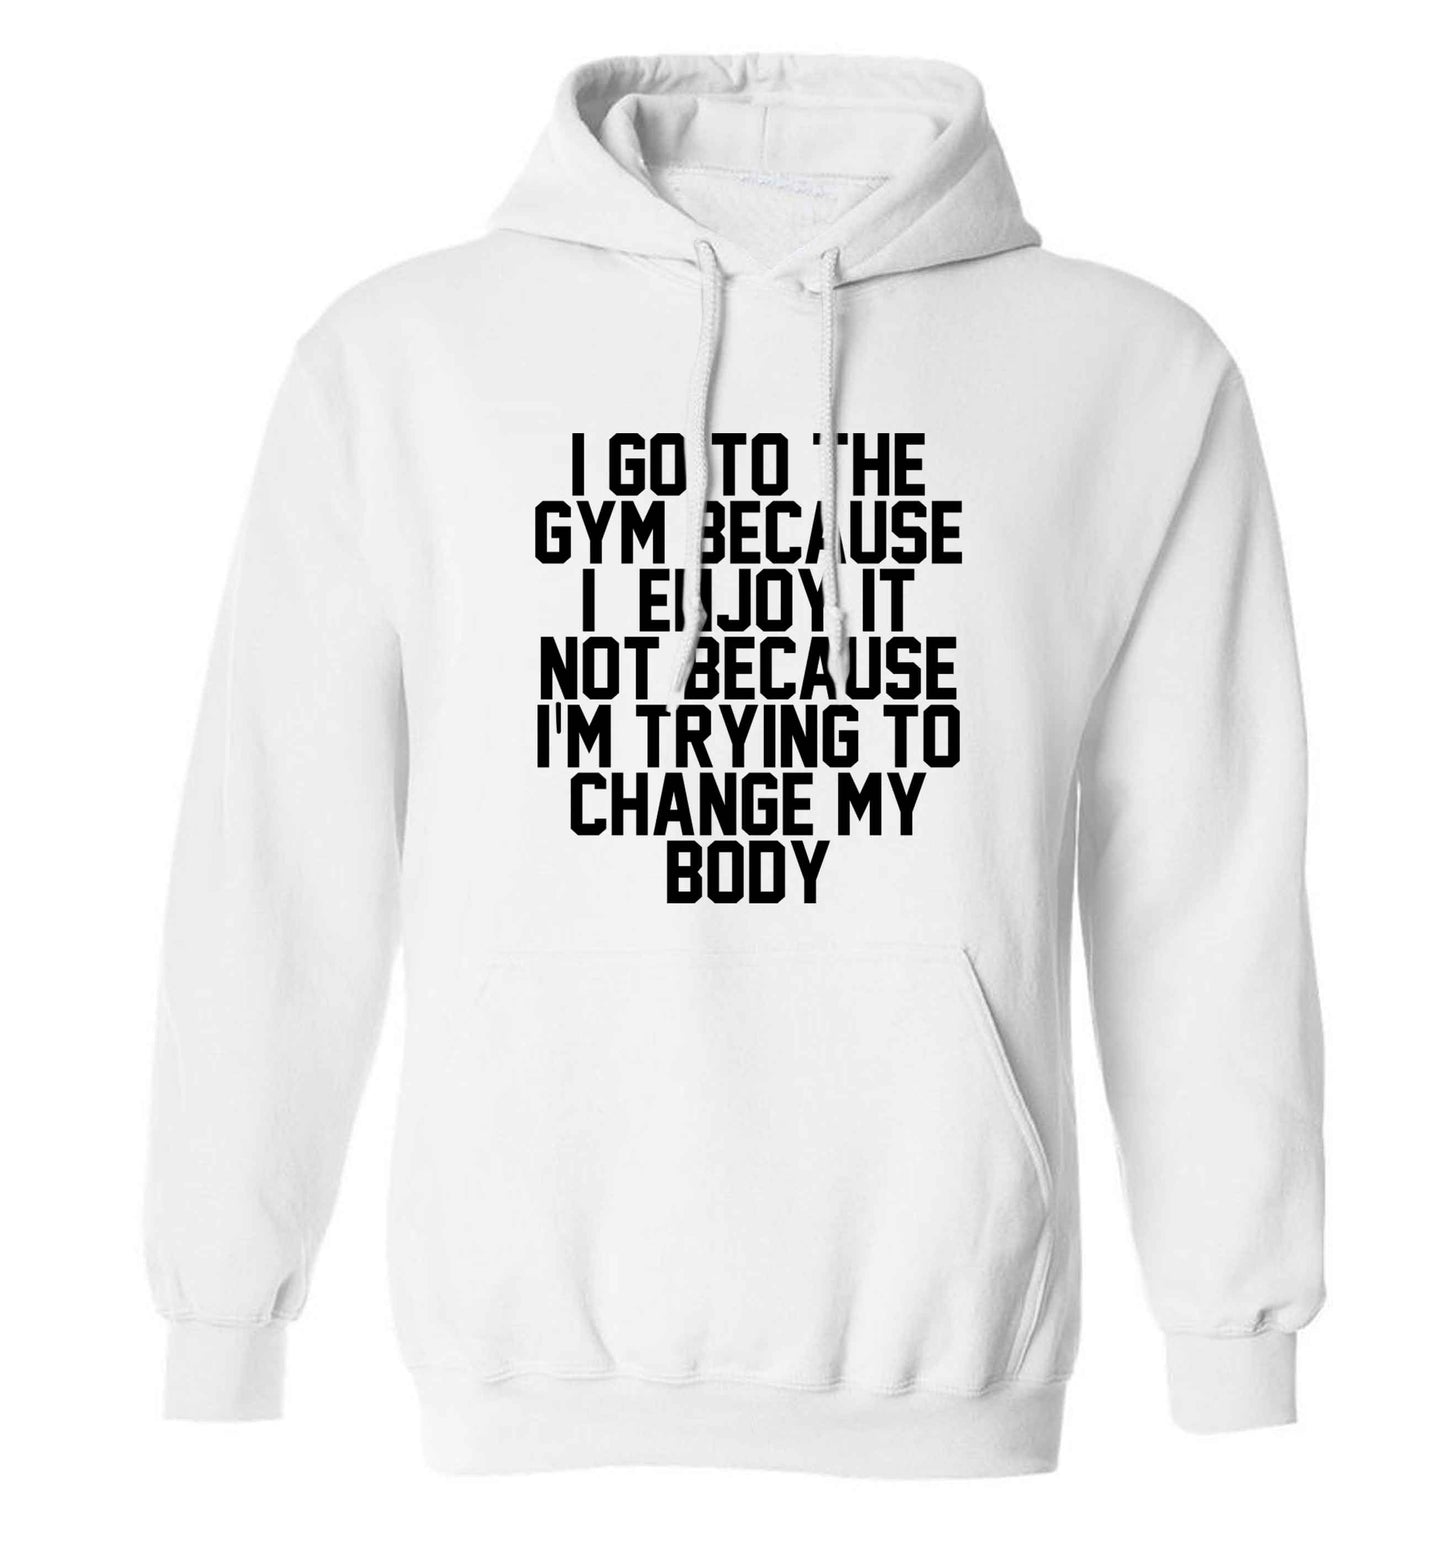 I go to the gym because I enjoy it not because I'm trying to change my body adults unisex white hoodie 2XL